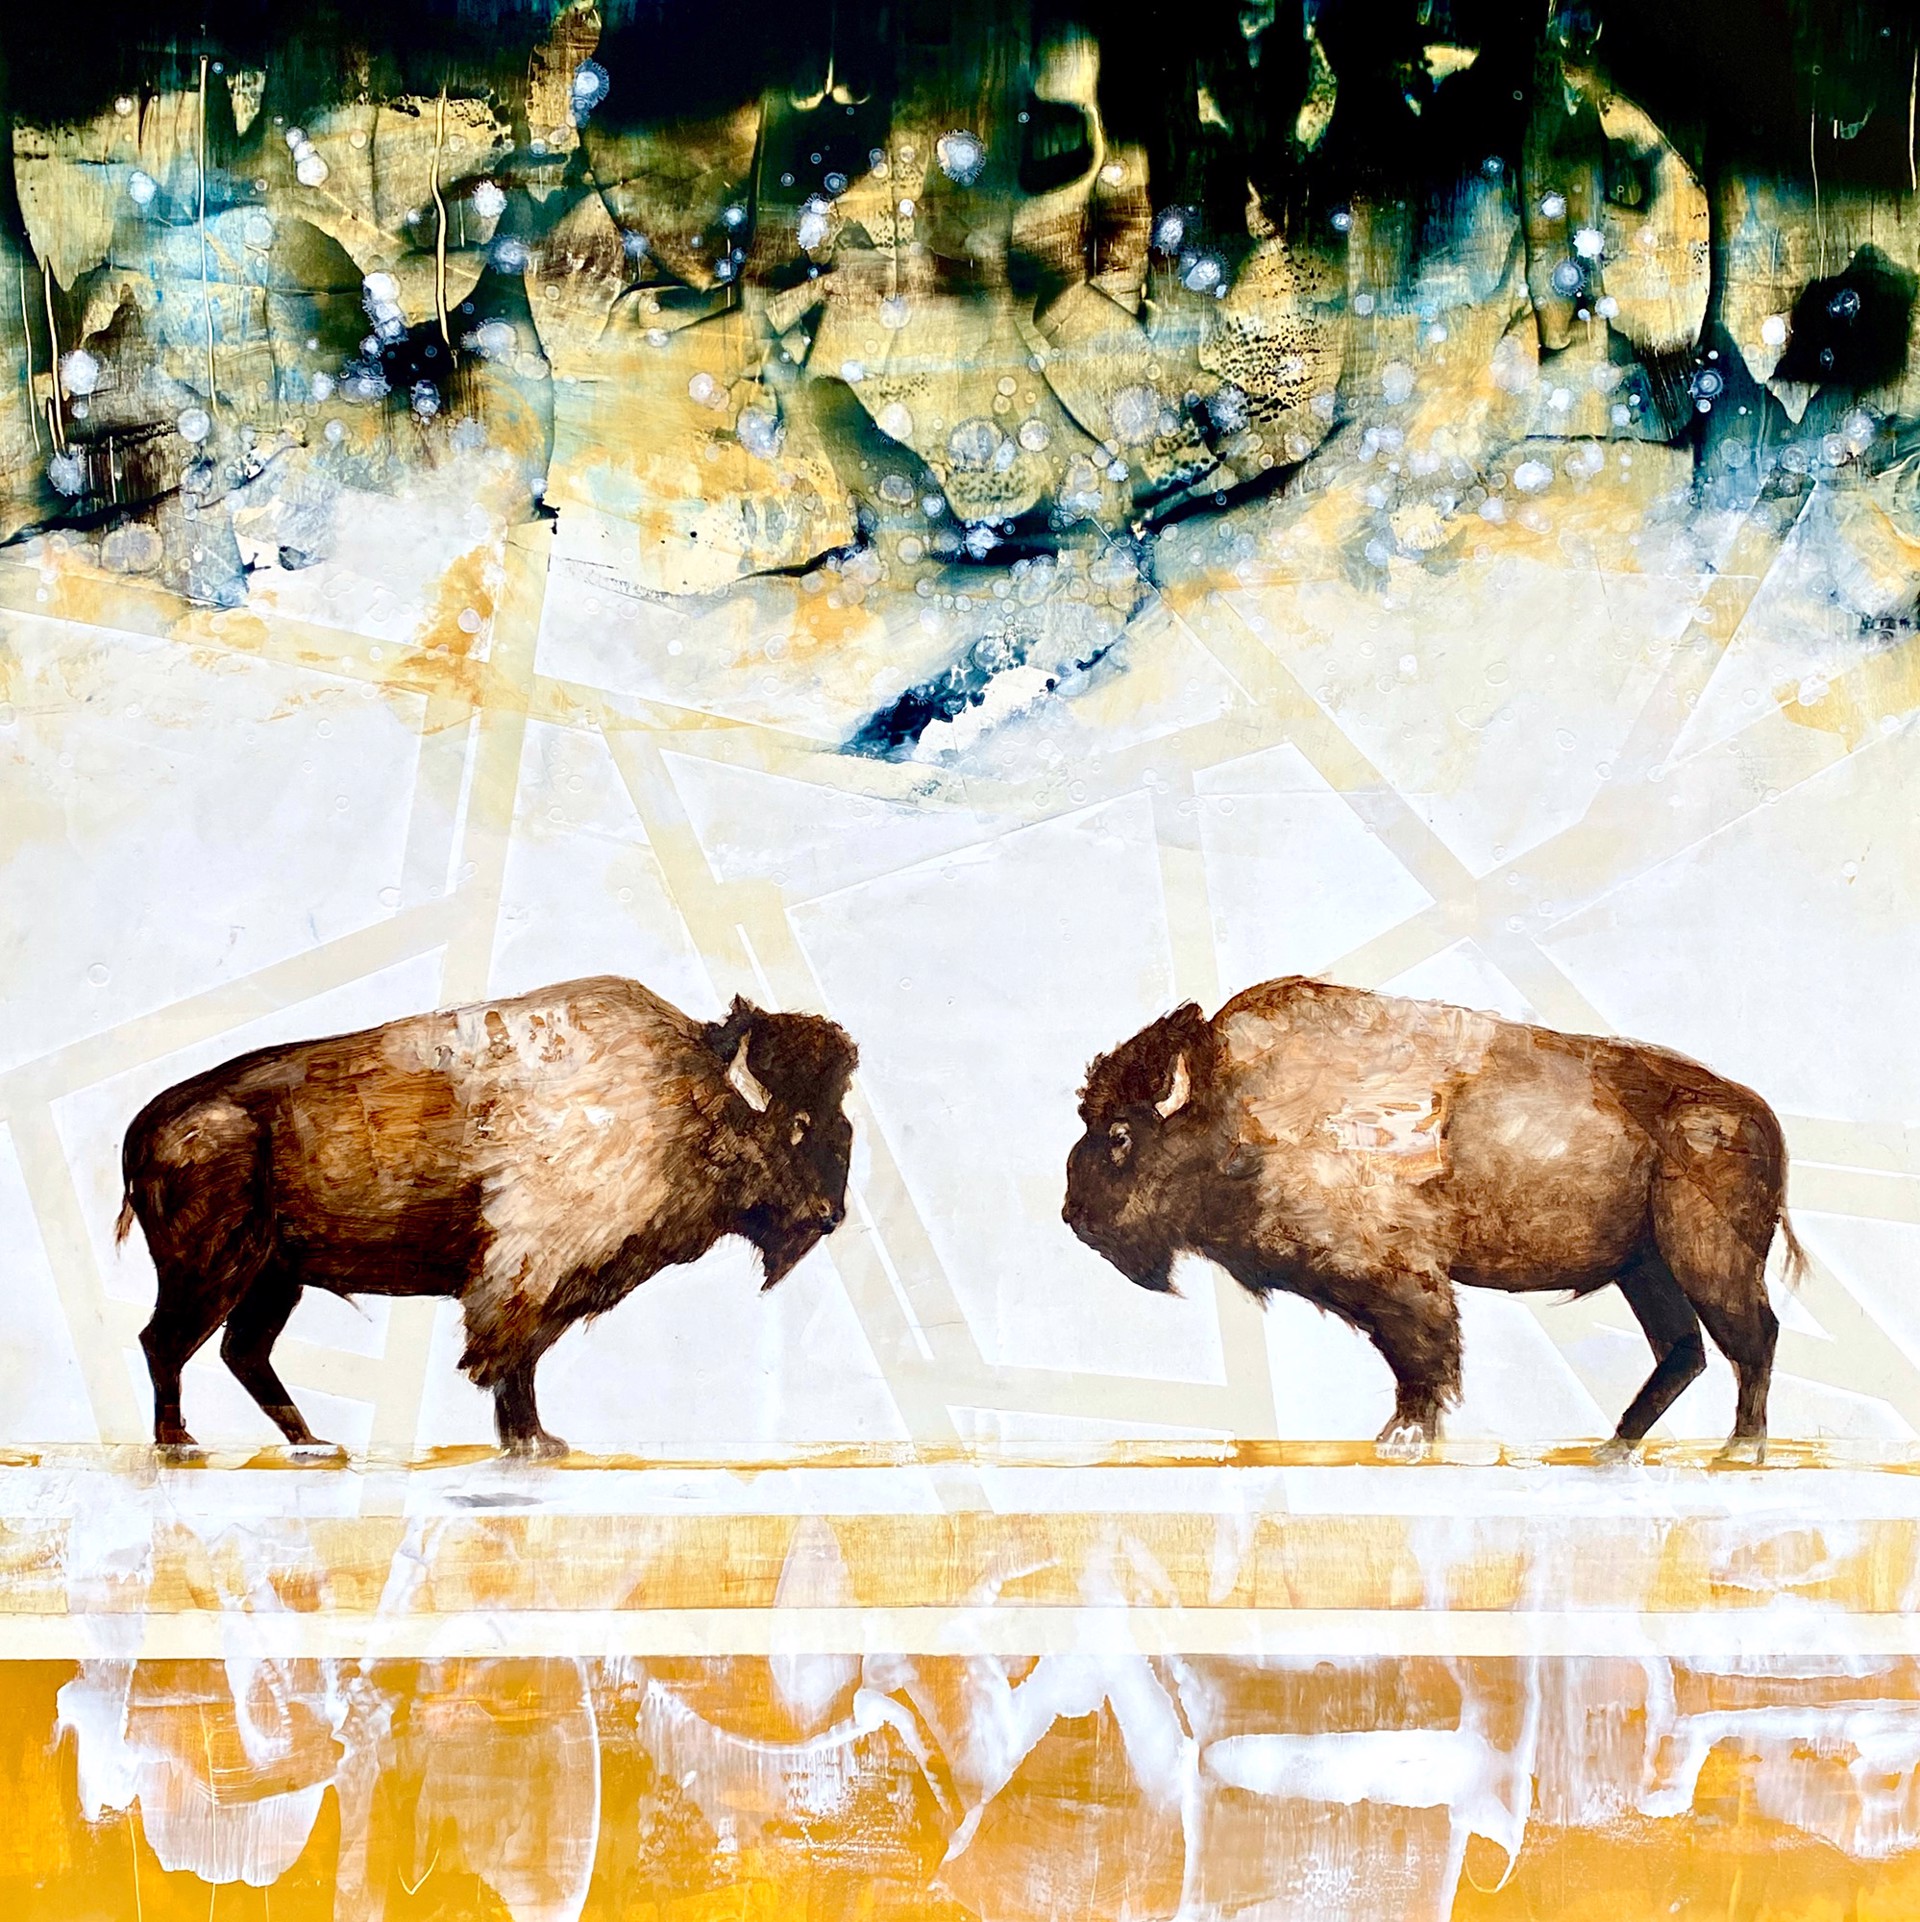 Original Oil Painting By Jenna Von Benedikt Of Two Bison Facing Each Other In An Abstract Background